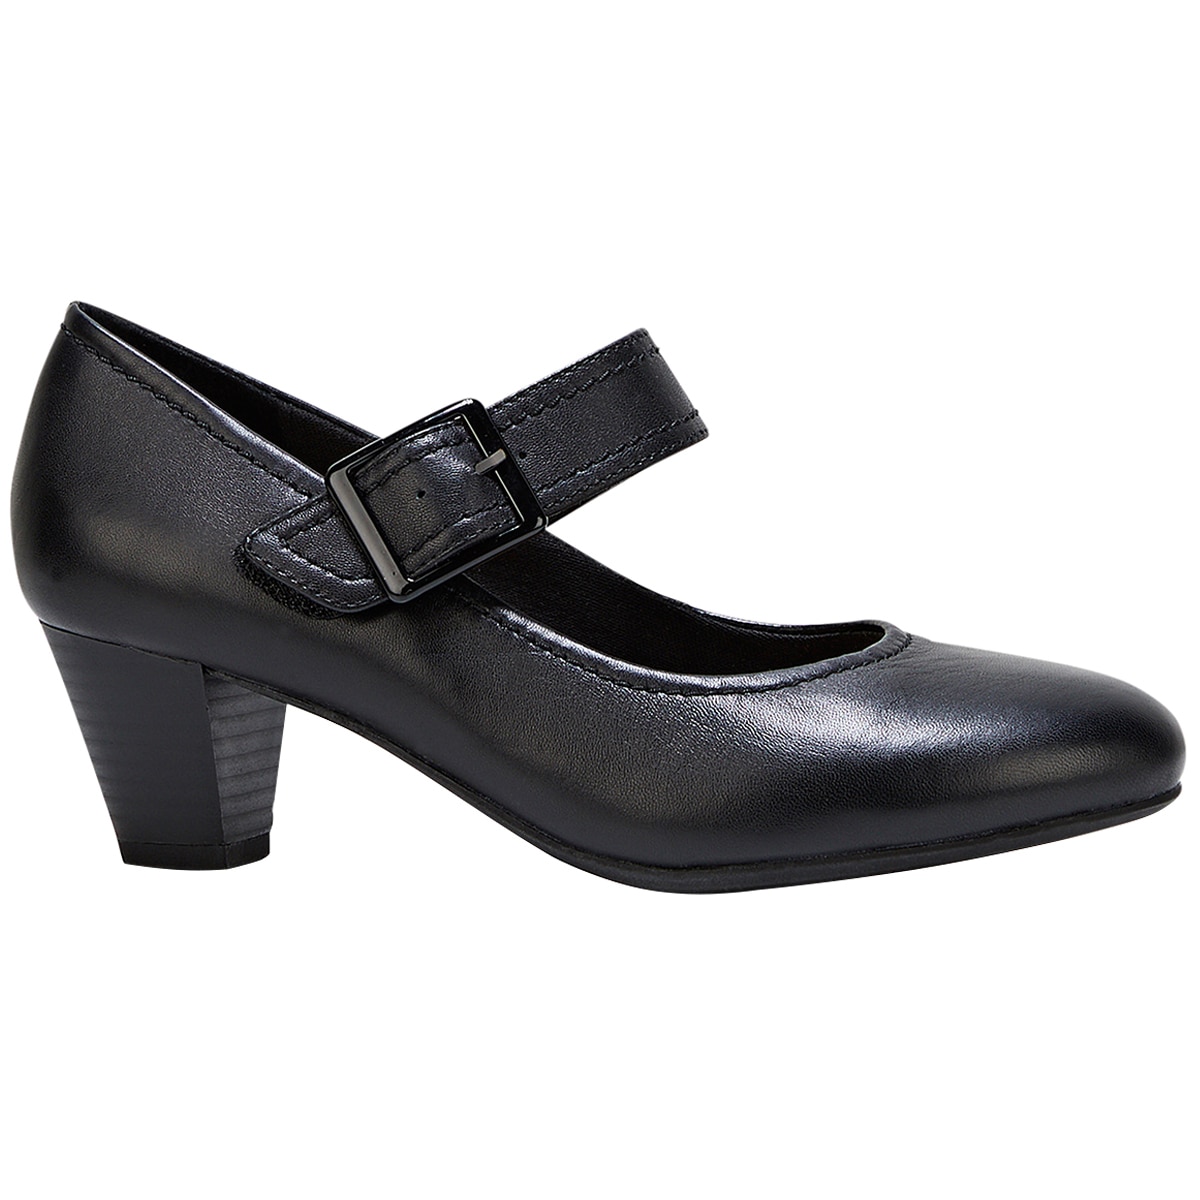 hush puppies wide fit womens shoes uk